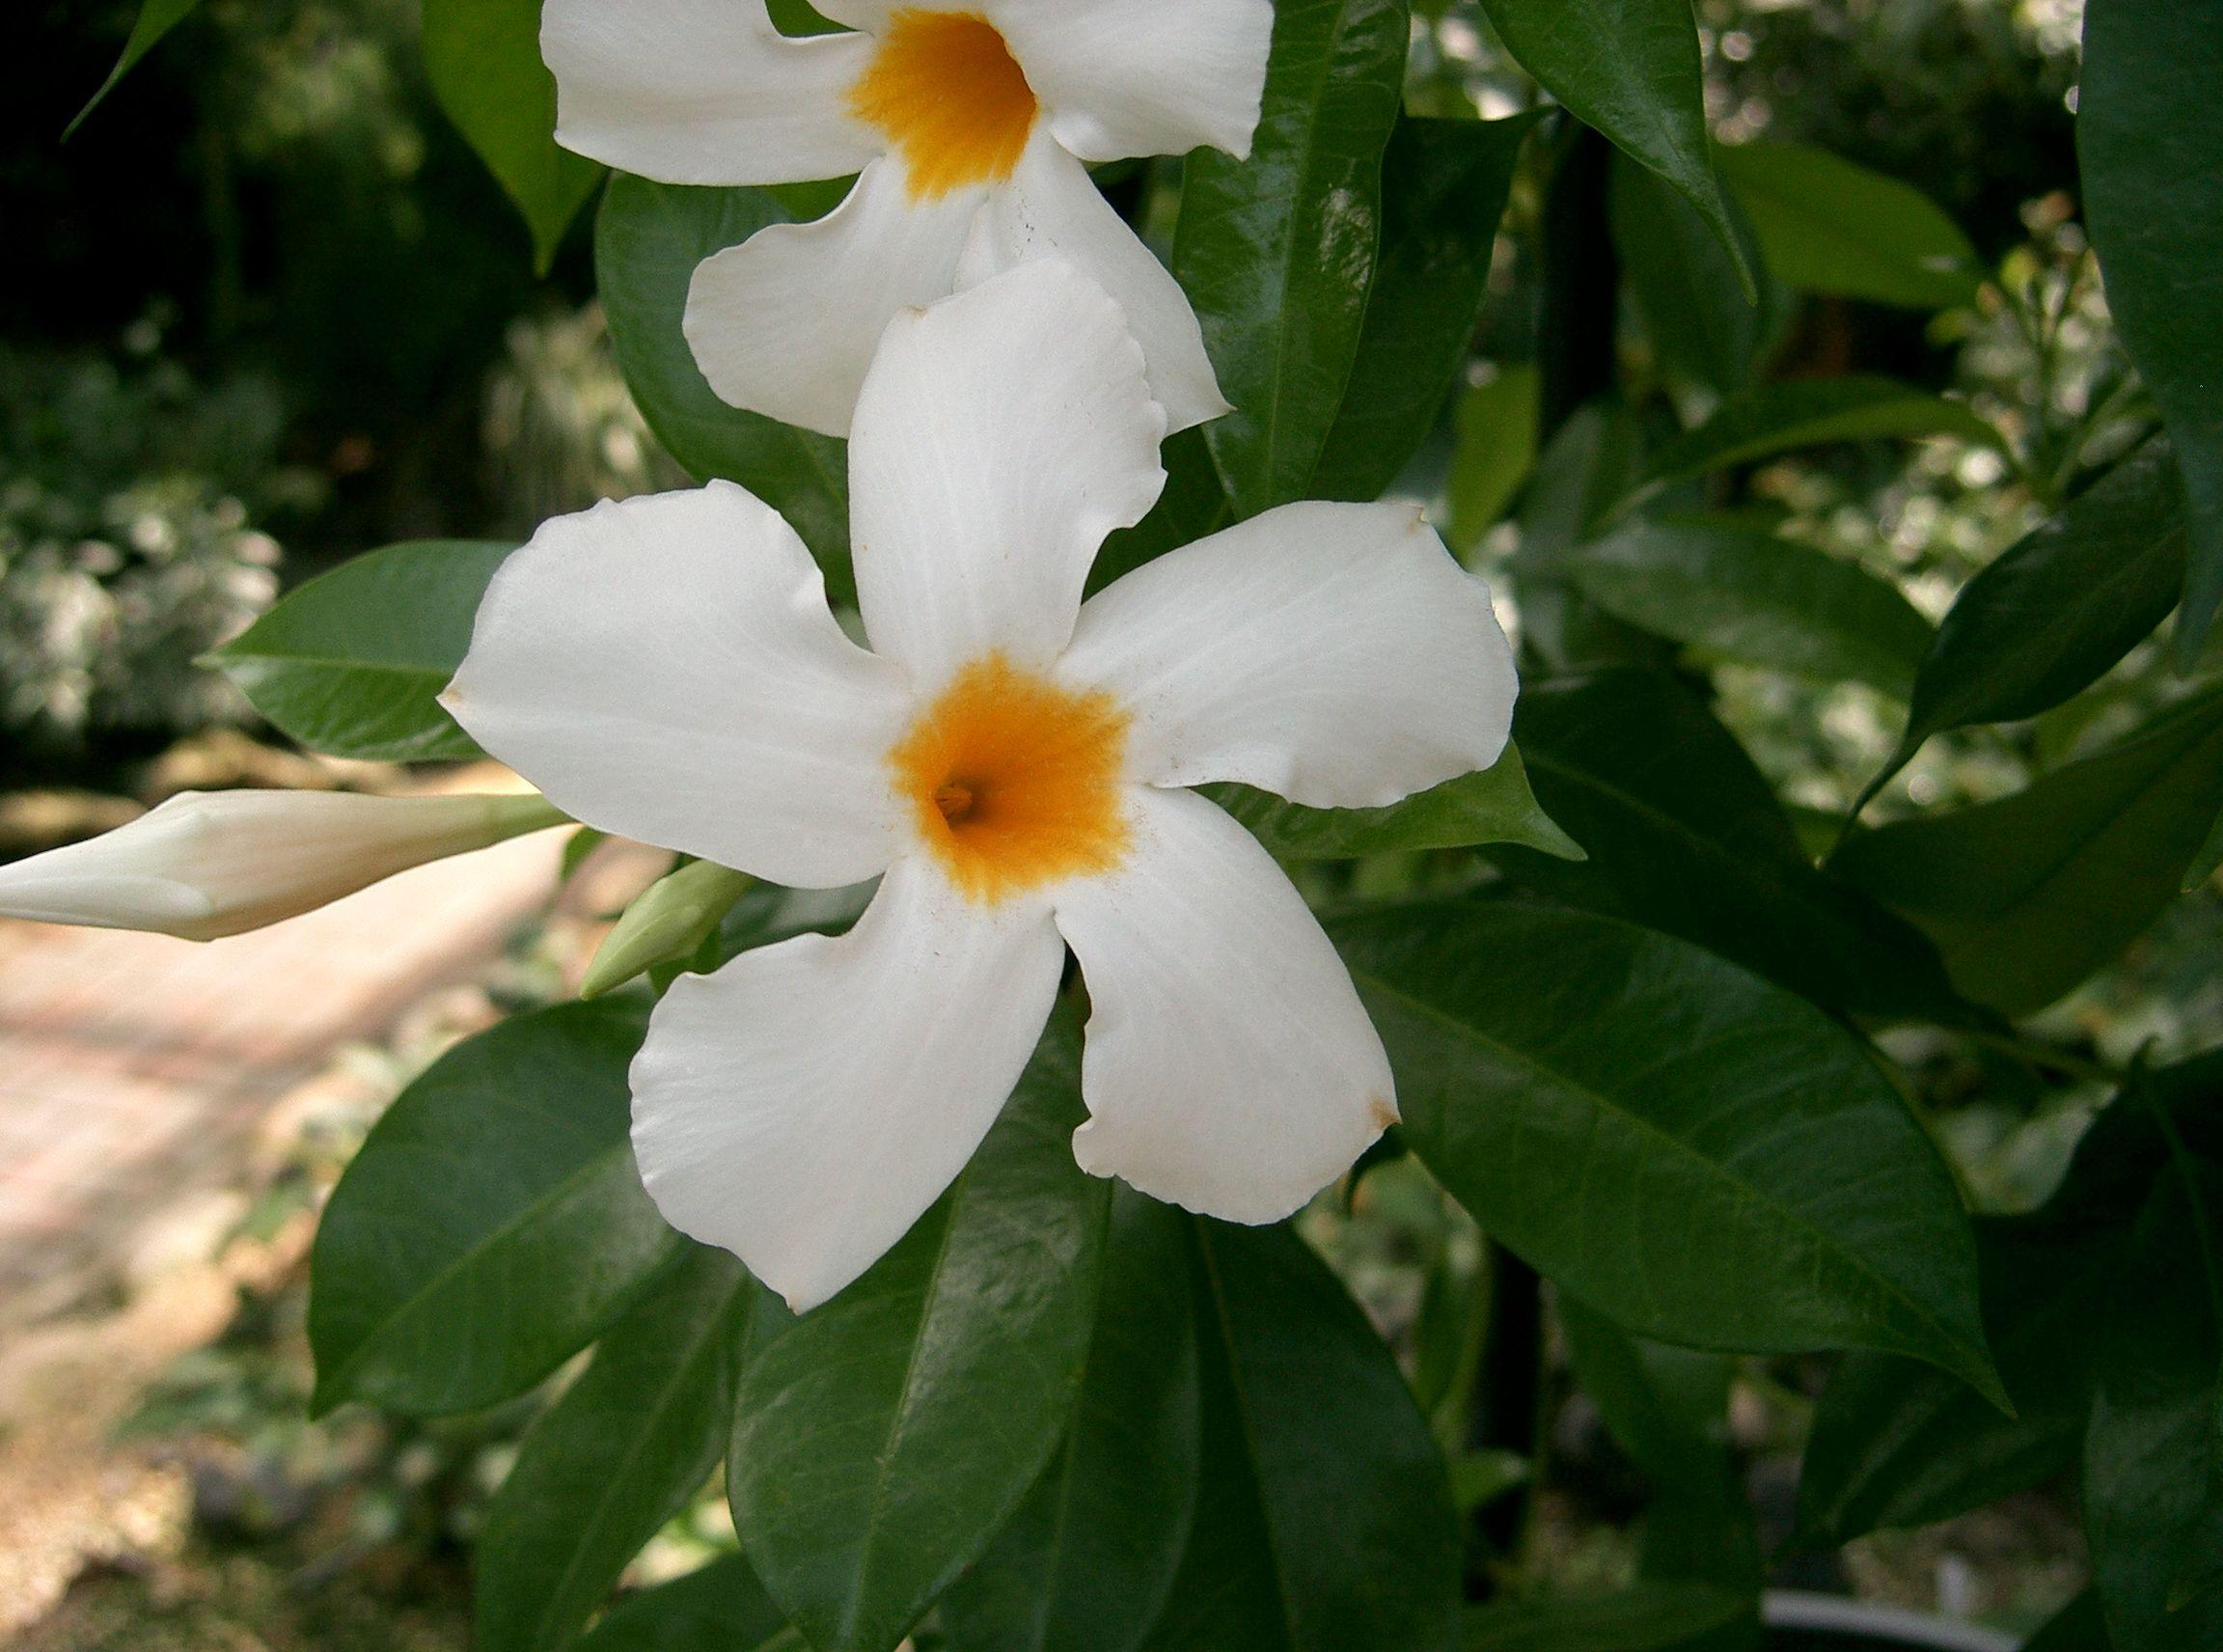 White flower with orange center and stigma. off-white bud, lime petiole, green leaves, yellow midrib and veins.